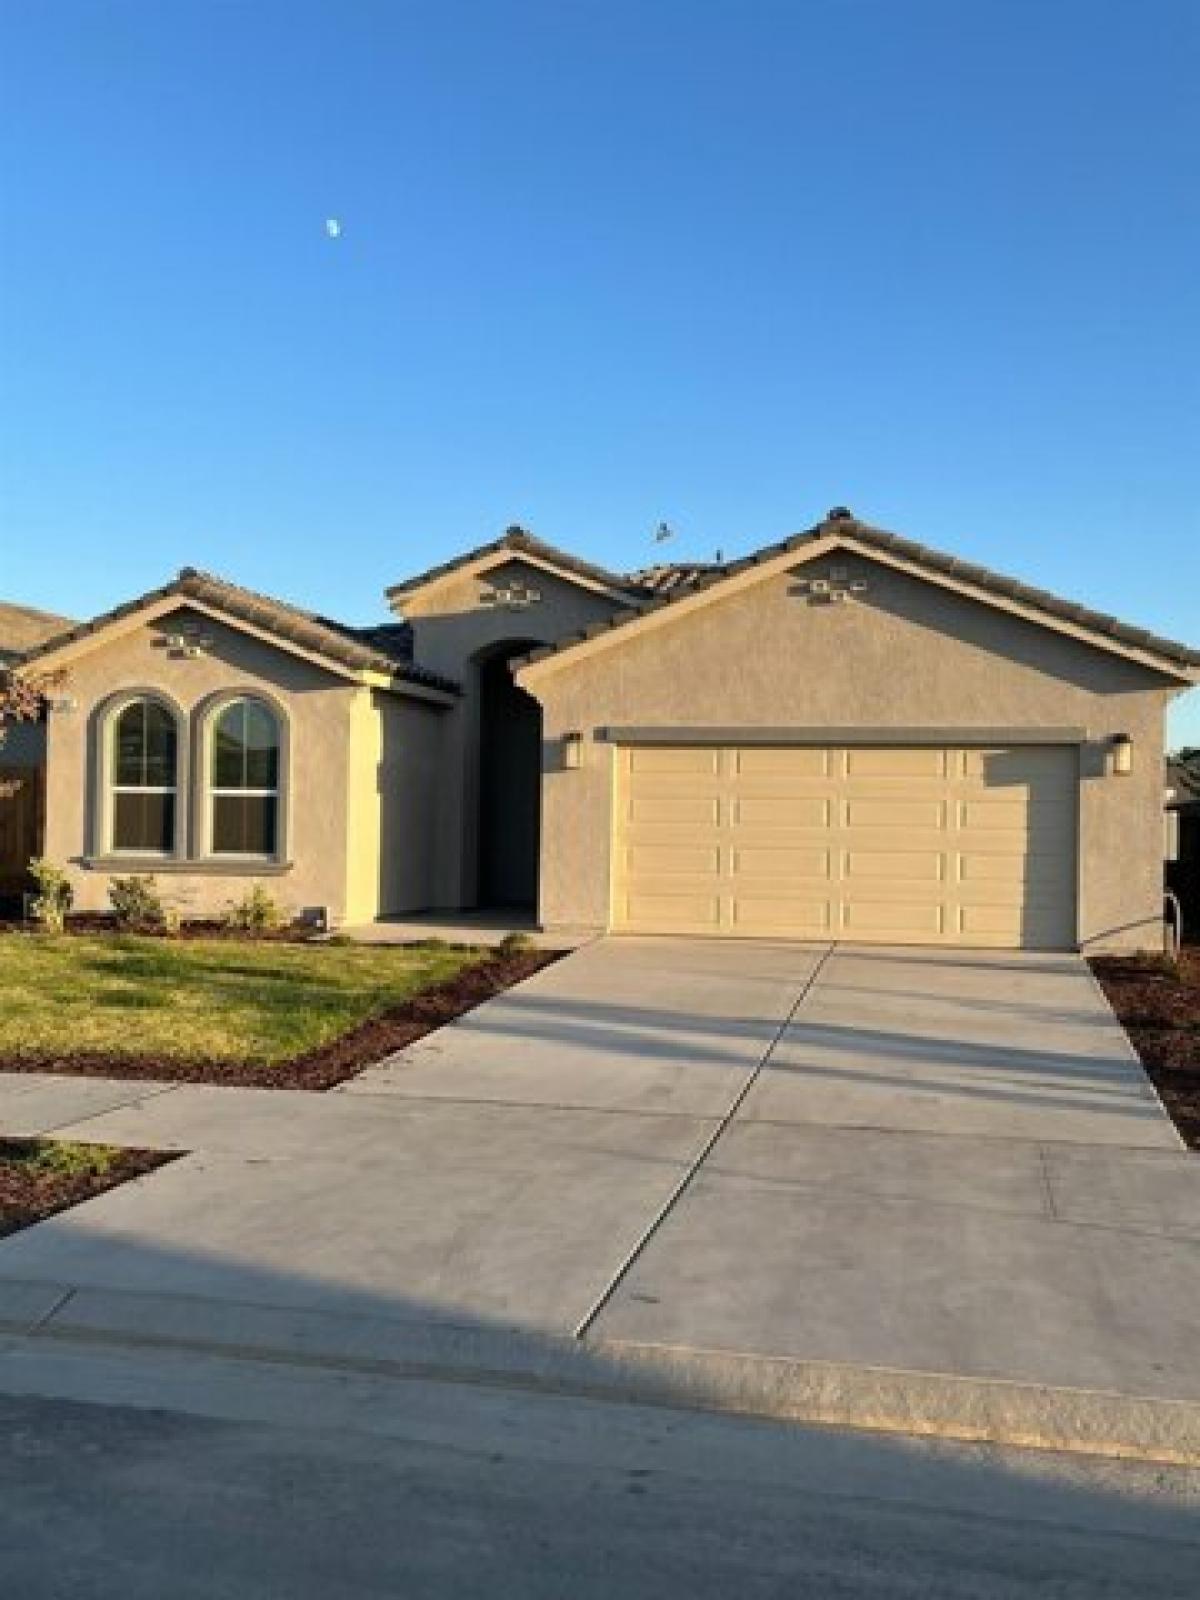 Picture of Home For Sale in Madera, California, United States